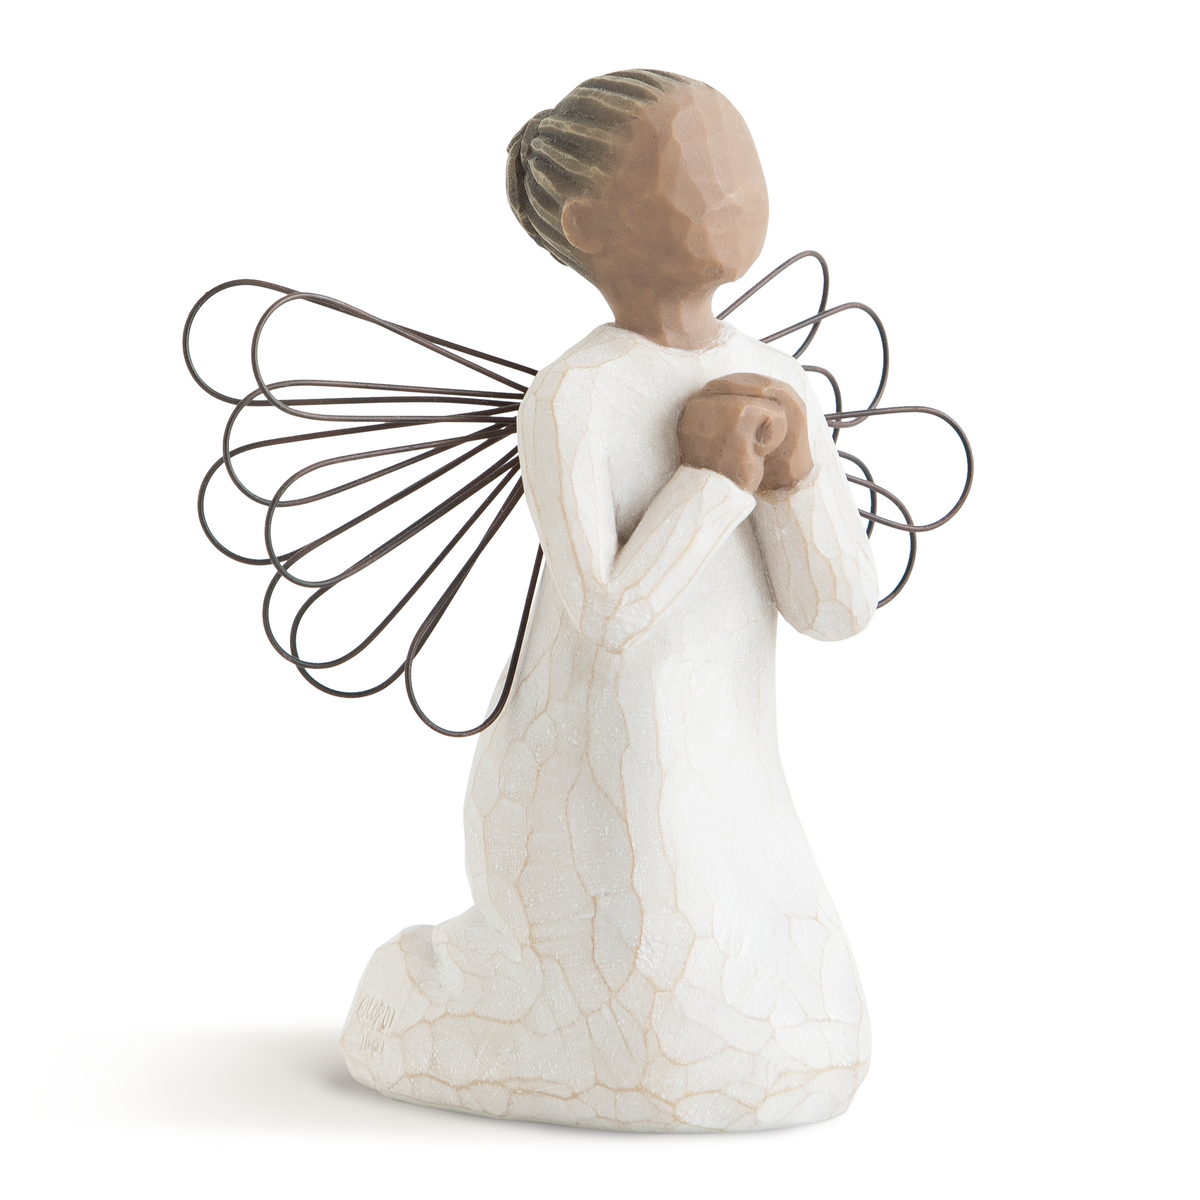  Willow Tree with Love Angel, You are Loved, Figure Holding Out  Red Heart, Gift for Wedding, Anniversary or Valentine's Day, Sculpted  Hand-Painted Darker-Skin Figure : Susan Lordi: Home & Kitchen